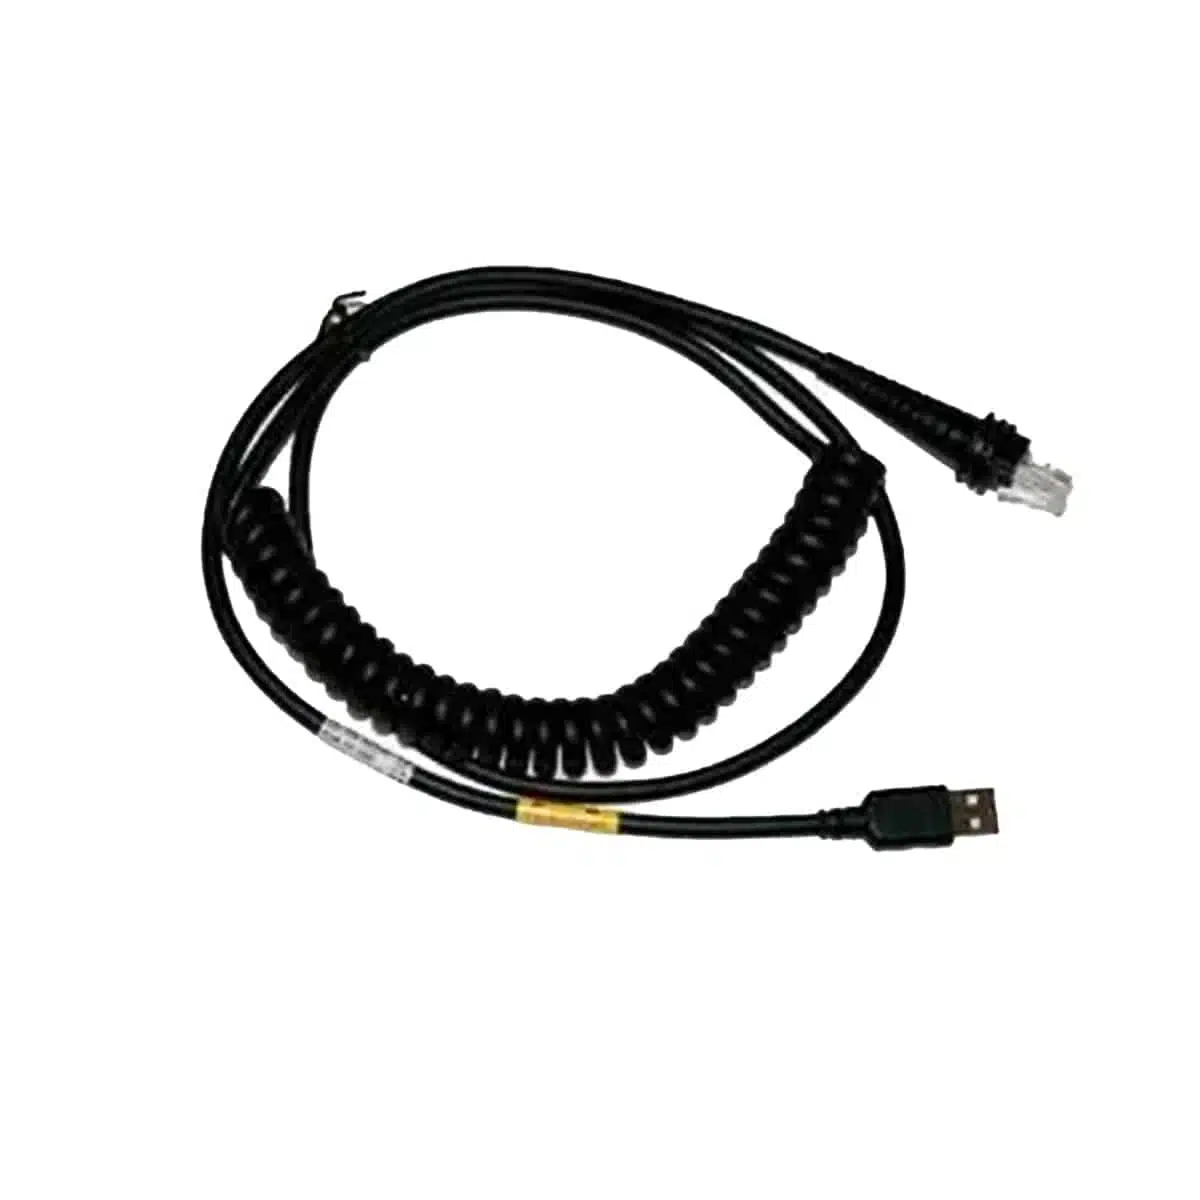 Honeywell 3 Meters USB A Coiled Black Cable CBL-500-300-C00